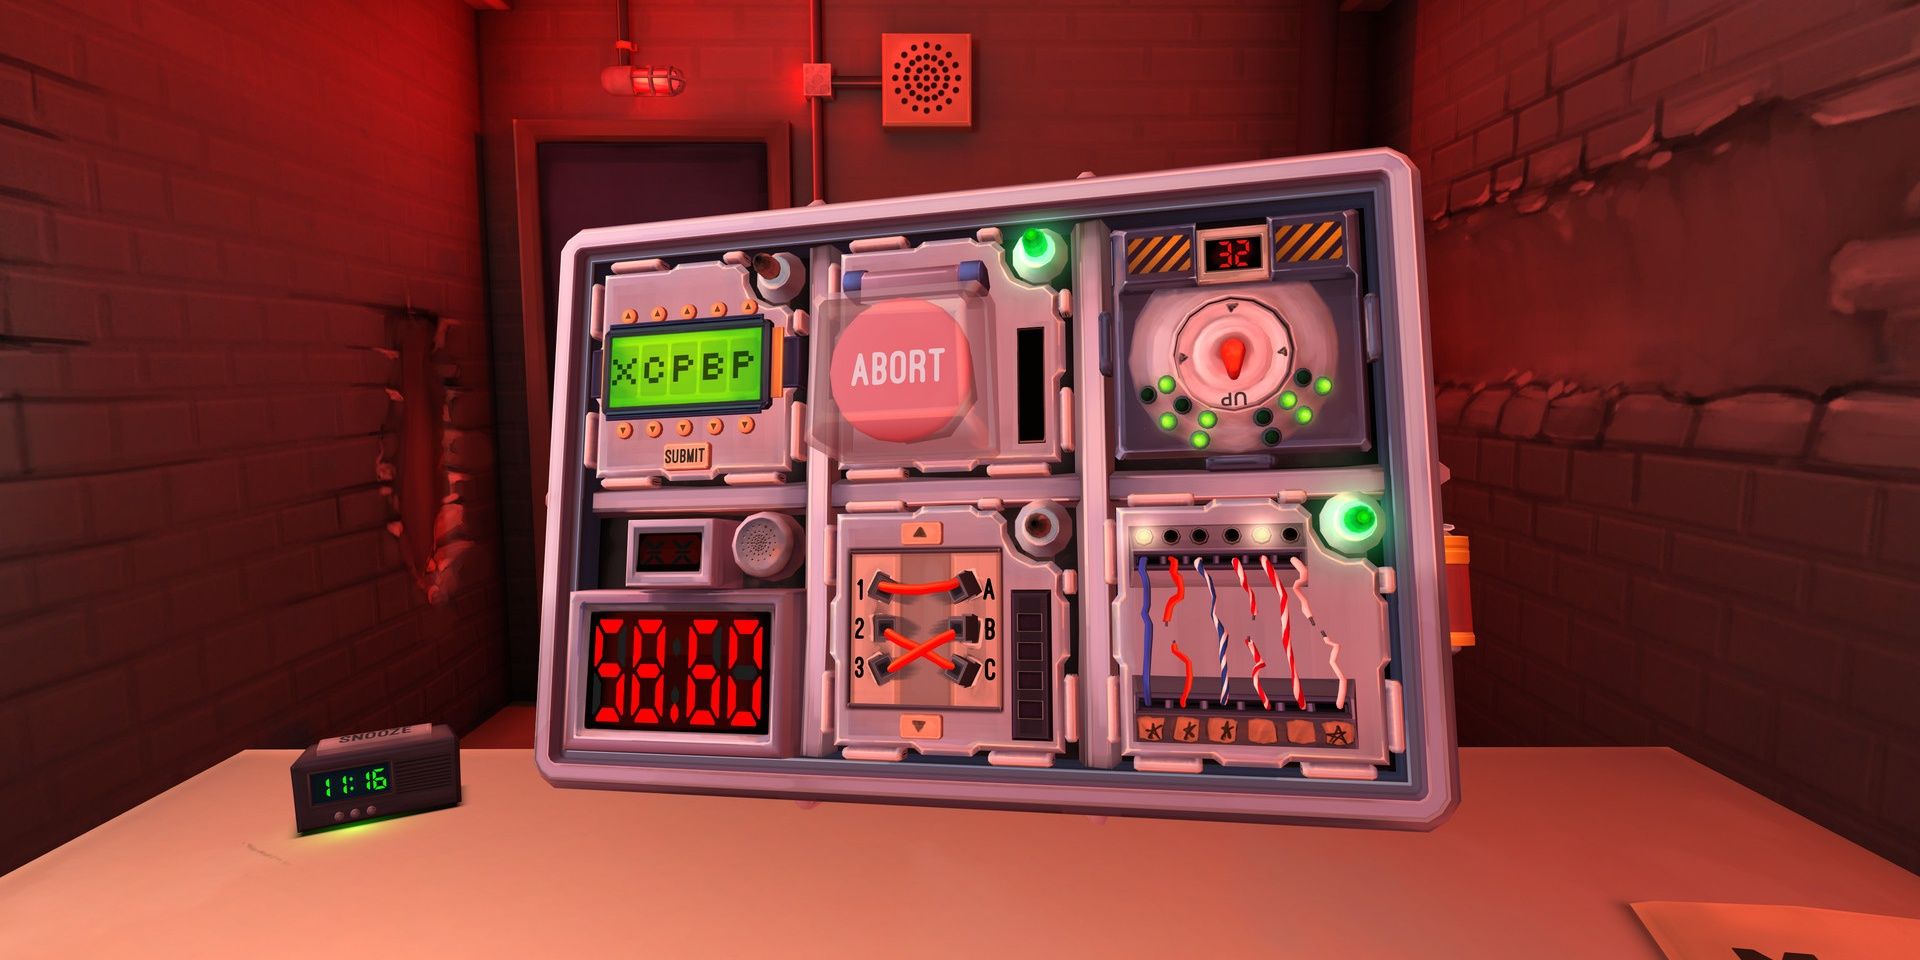 A bomb that has symbols like "XCPBP" and "Abort" with 58.60 seconds on it in Keep Talking and Nobody Explodes